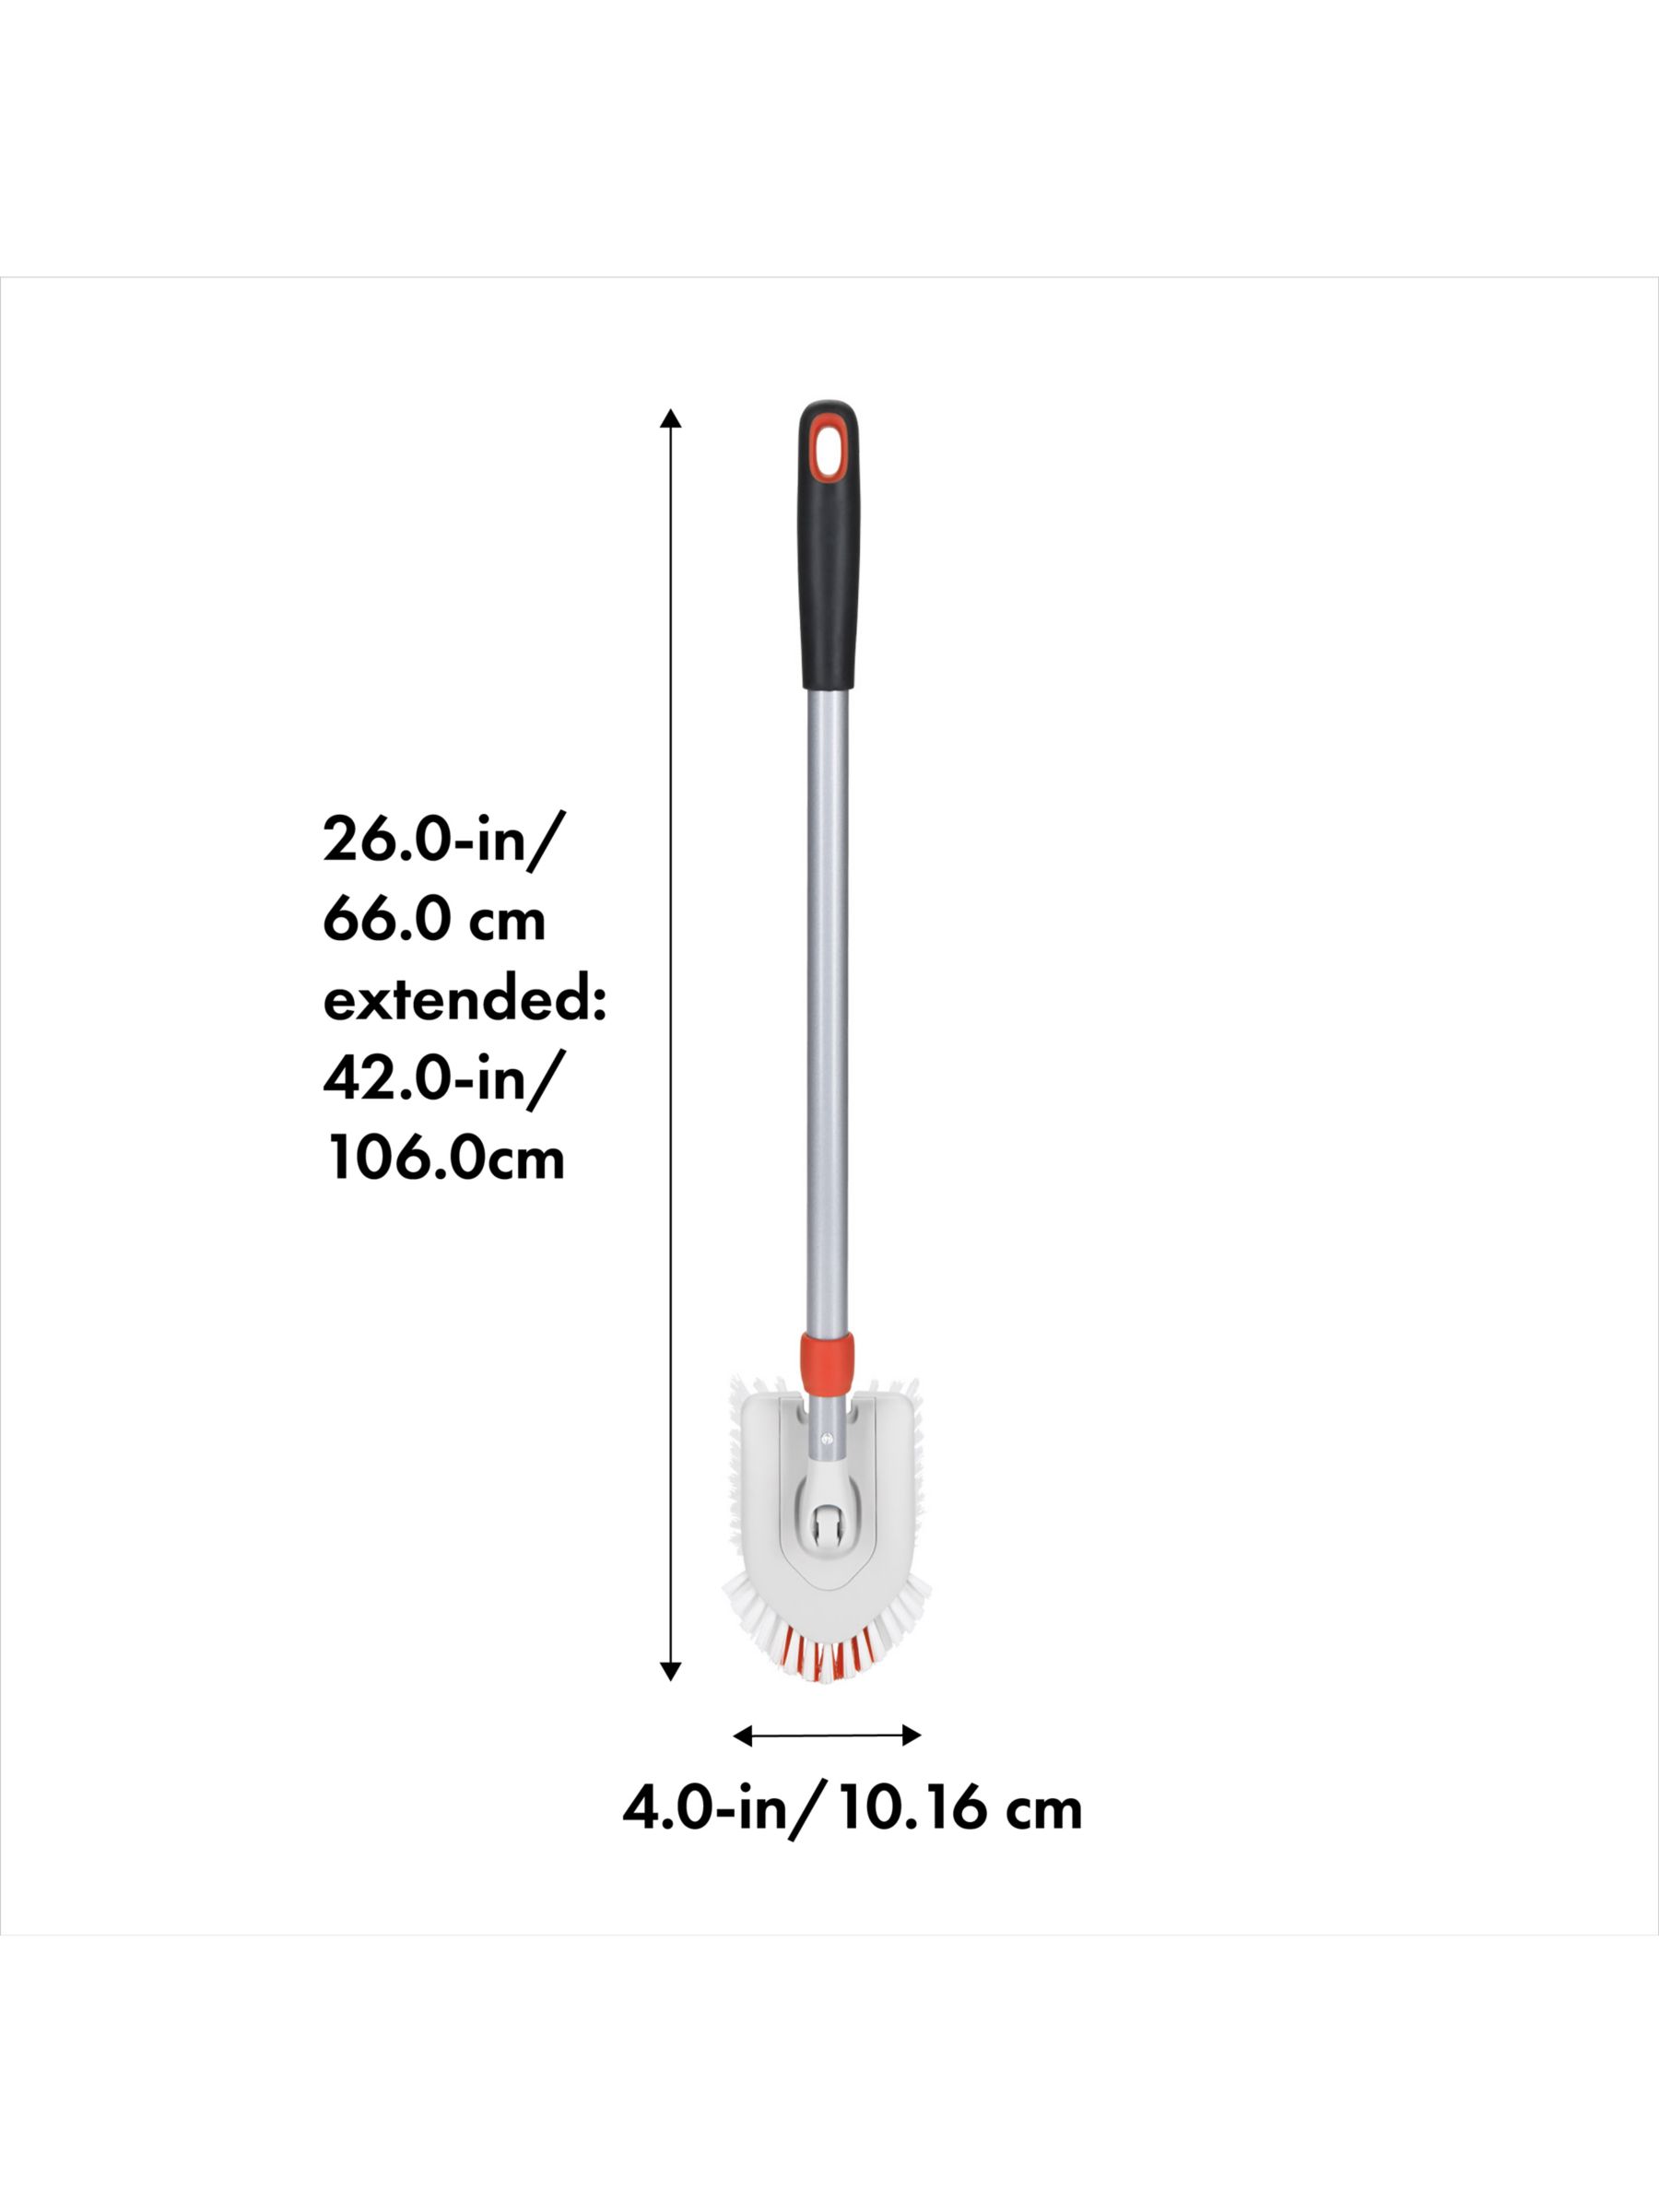 Extendable Tub & Tile Scrubber by OXO Good Grips : comfort grip handle